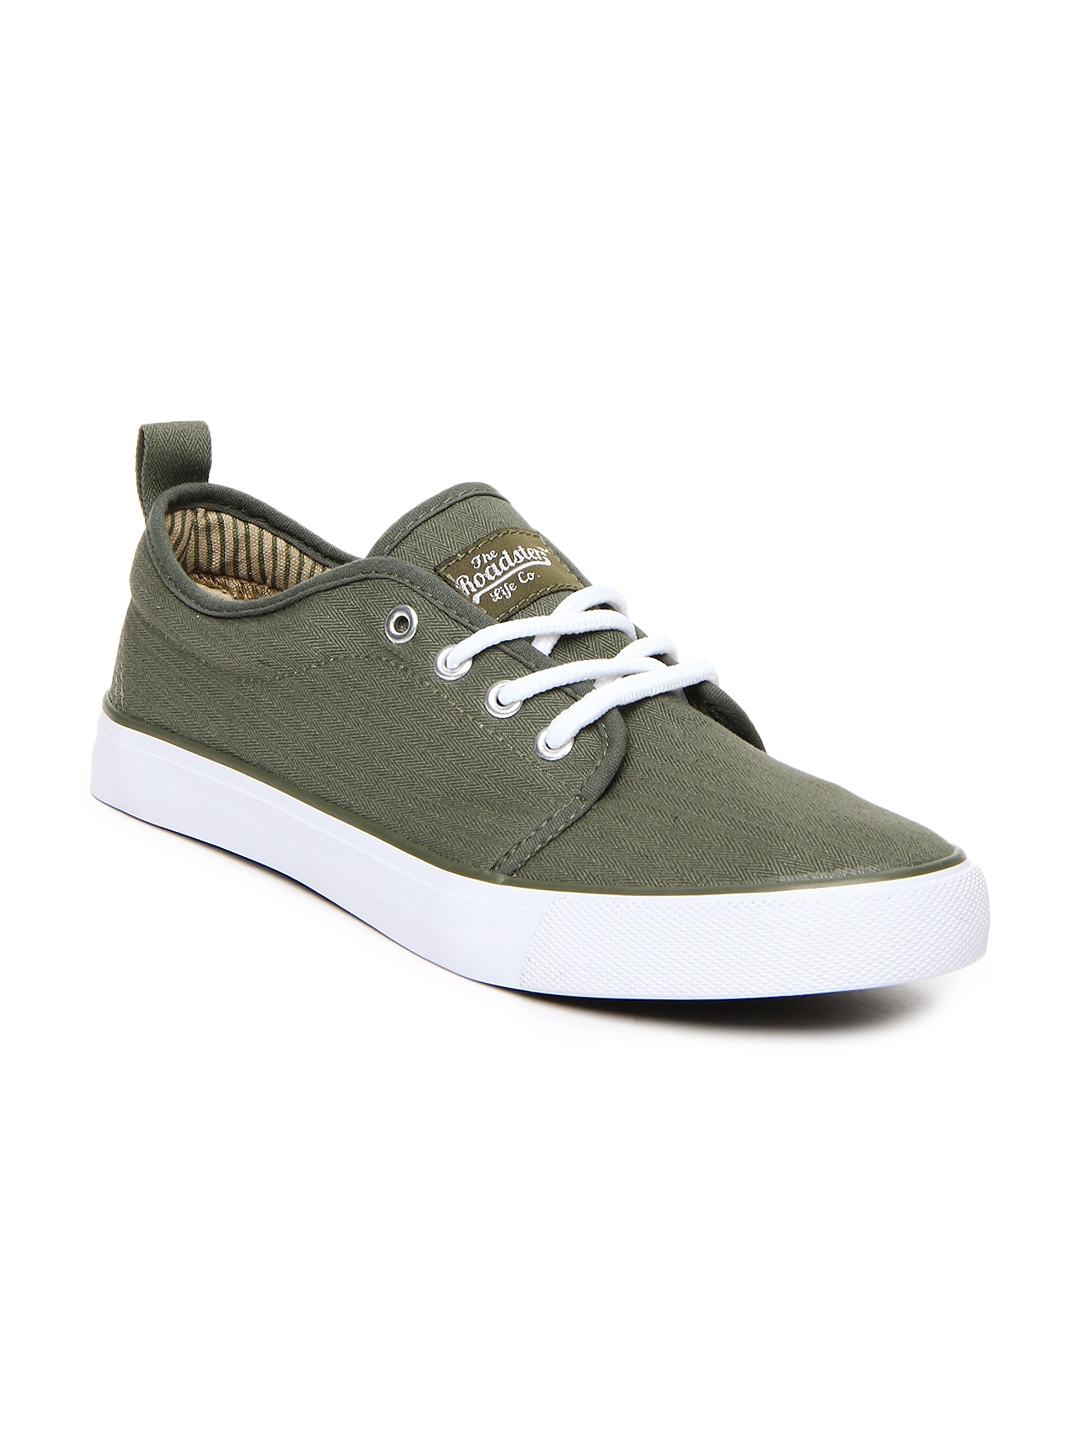 Buy Roadster Men Olive Green Casual Shoes - Casual Shoes for Men 326755 ...